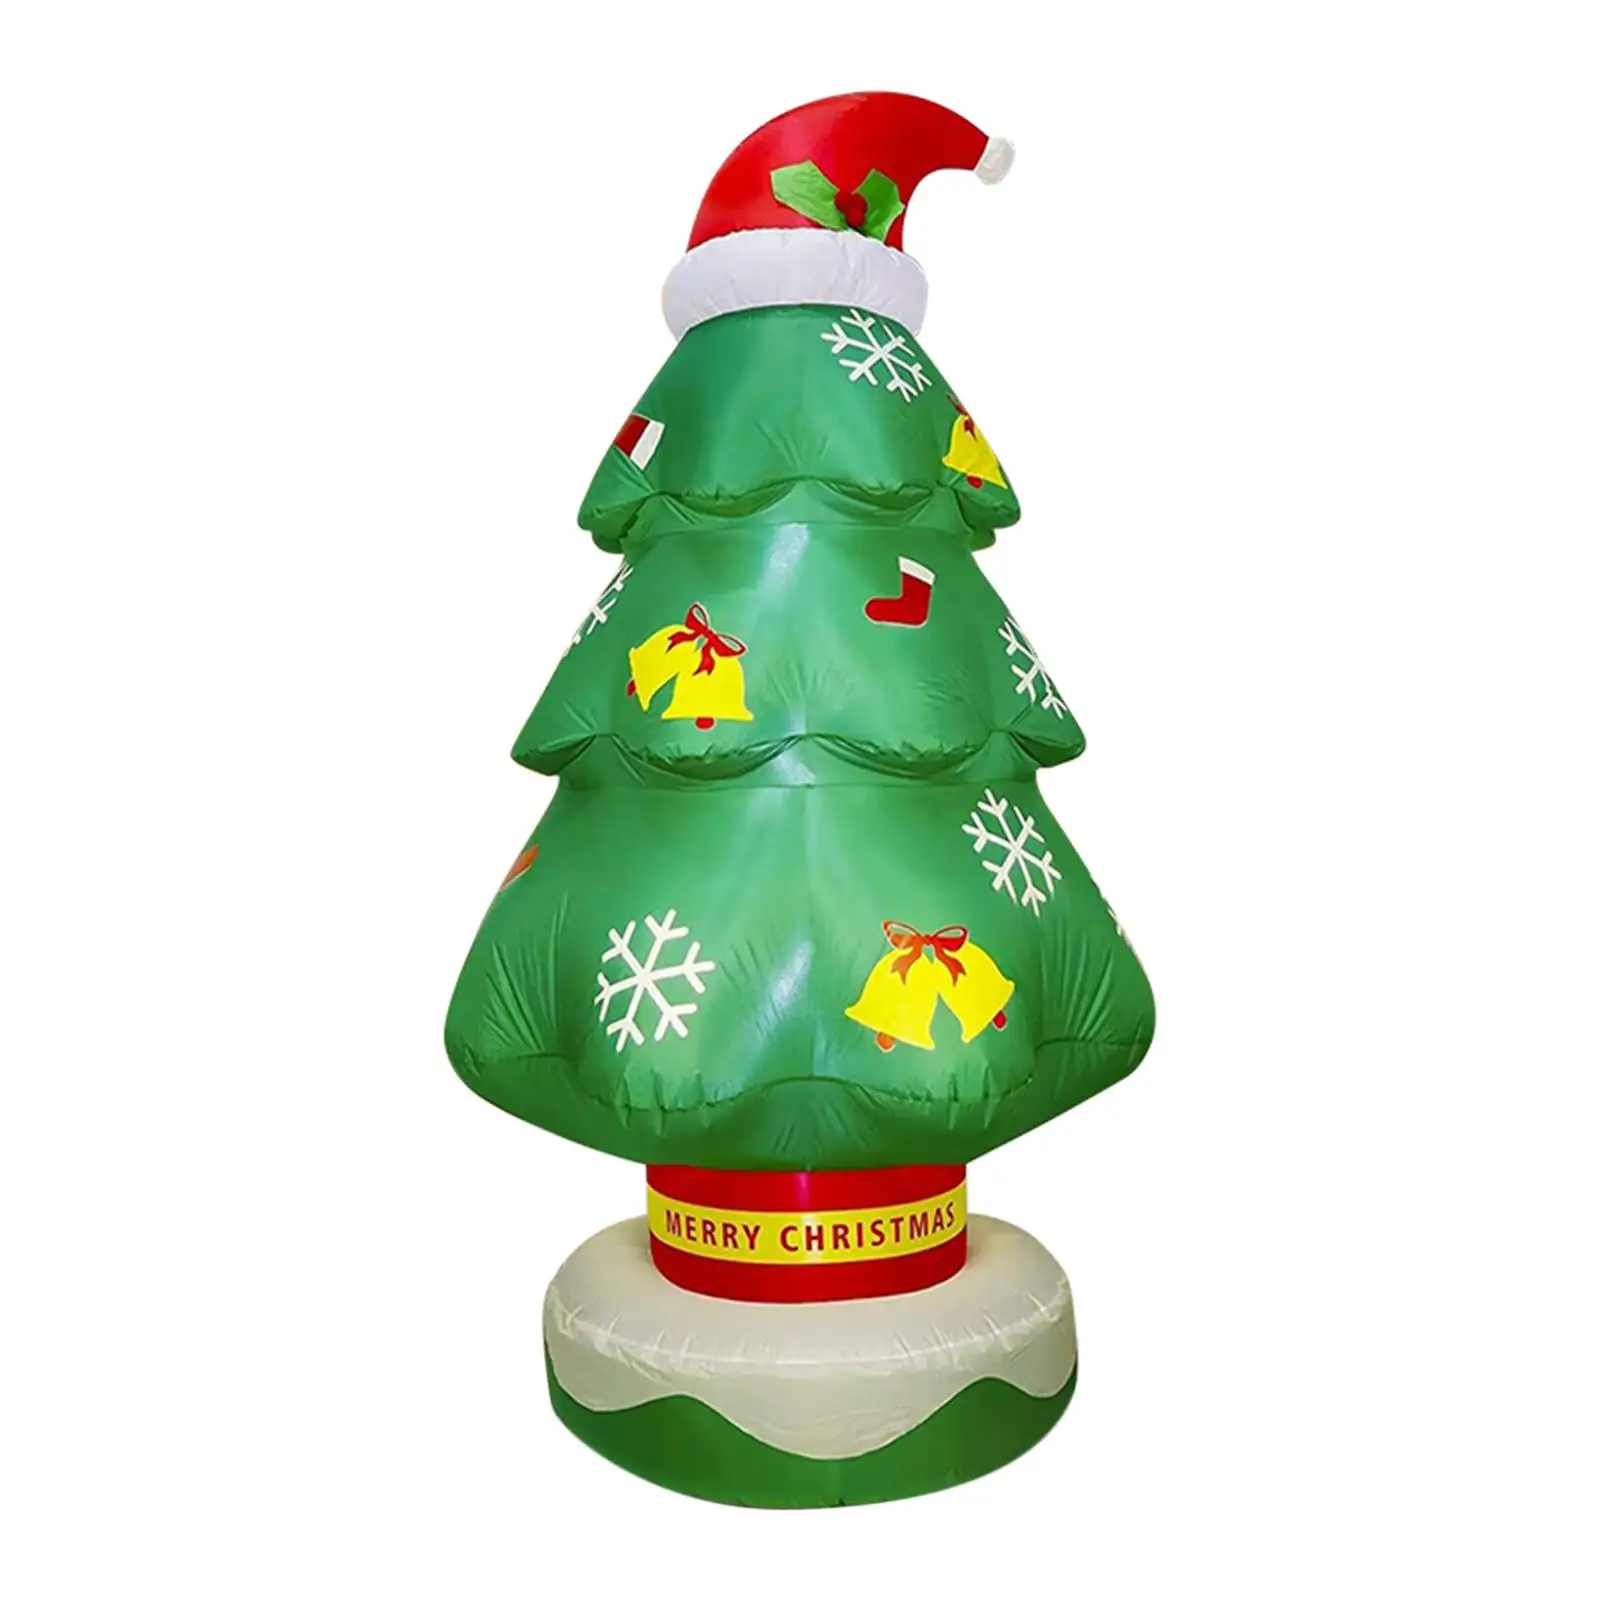 7ft Inflatable Christmas Tree Decoration LED Light up Luminous Toy Xmas Tree for Yard Lawn Garden Holiday Party Decor